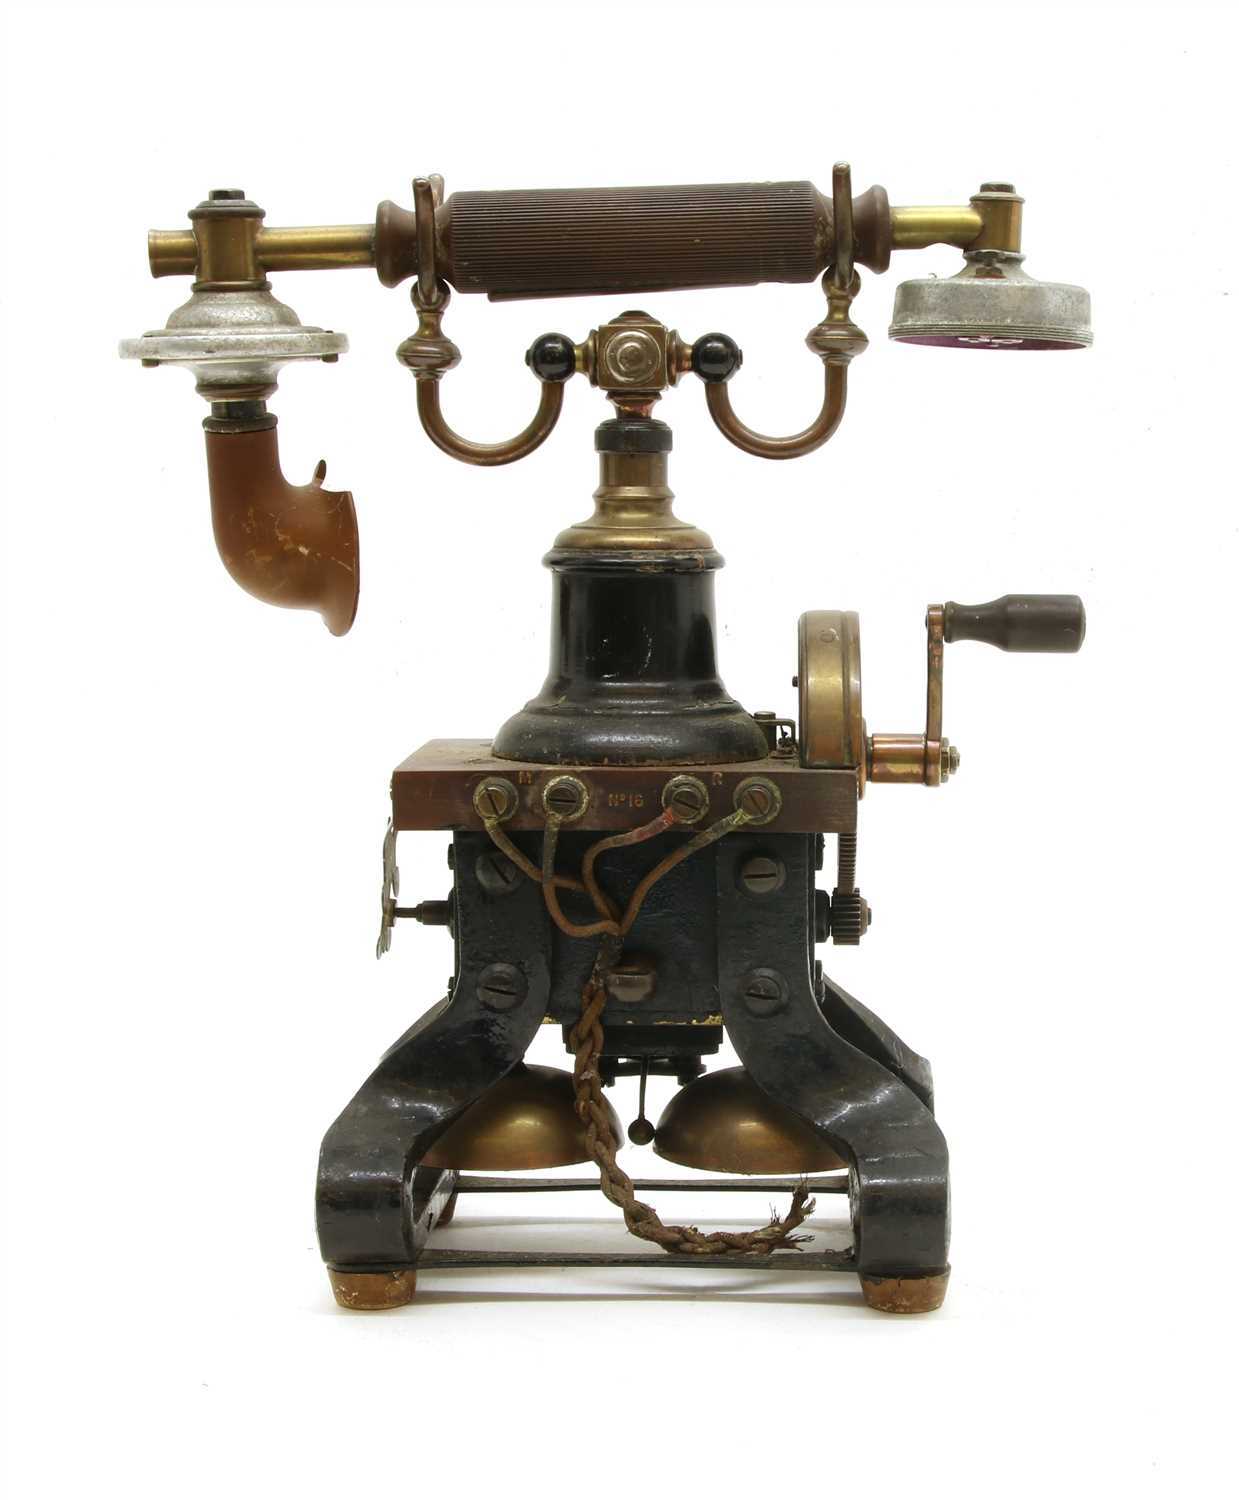 Lot 248 - A late 19th or early 20th century Ericsson skeleton telephone